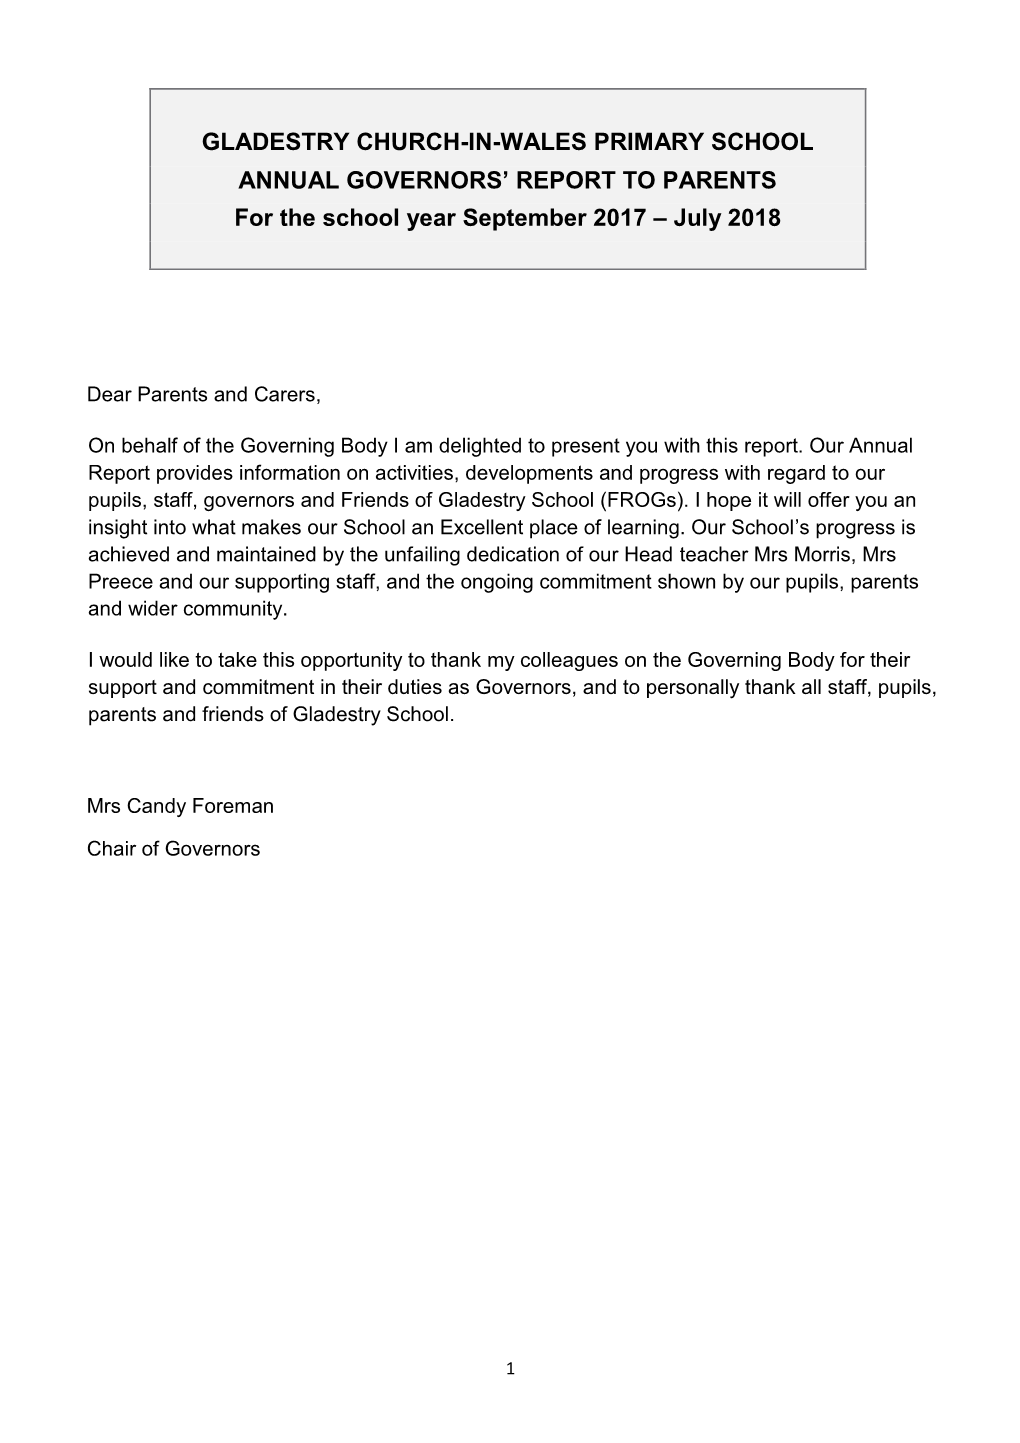 GLADESTRY CHURCH-IN-WALES PRIMARY SCHOOL ANNUAL GOVERNORS’ REPORT to PARENTS for the School Year September 2017 – July 2018